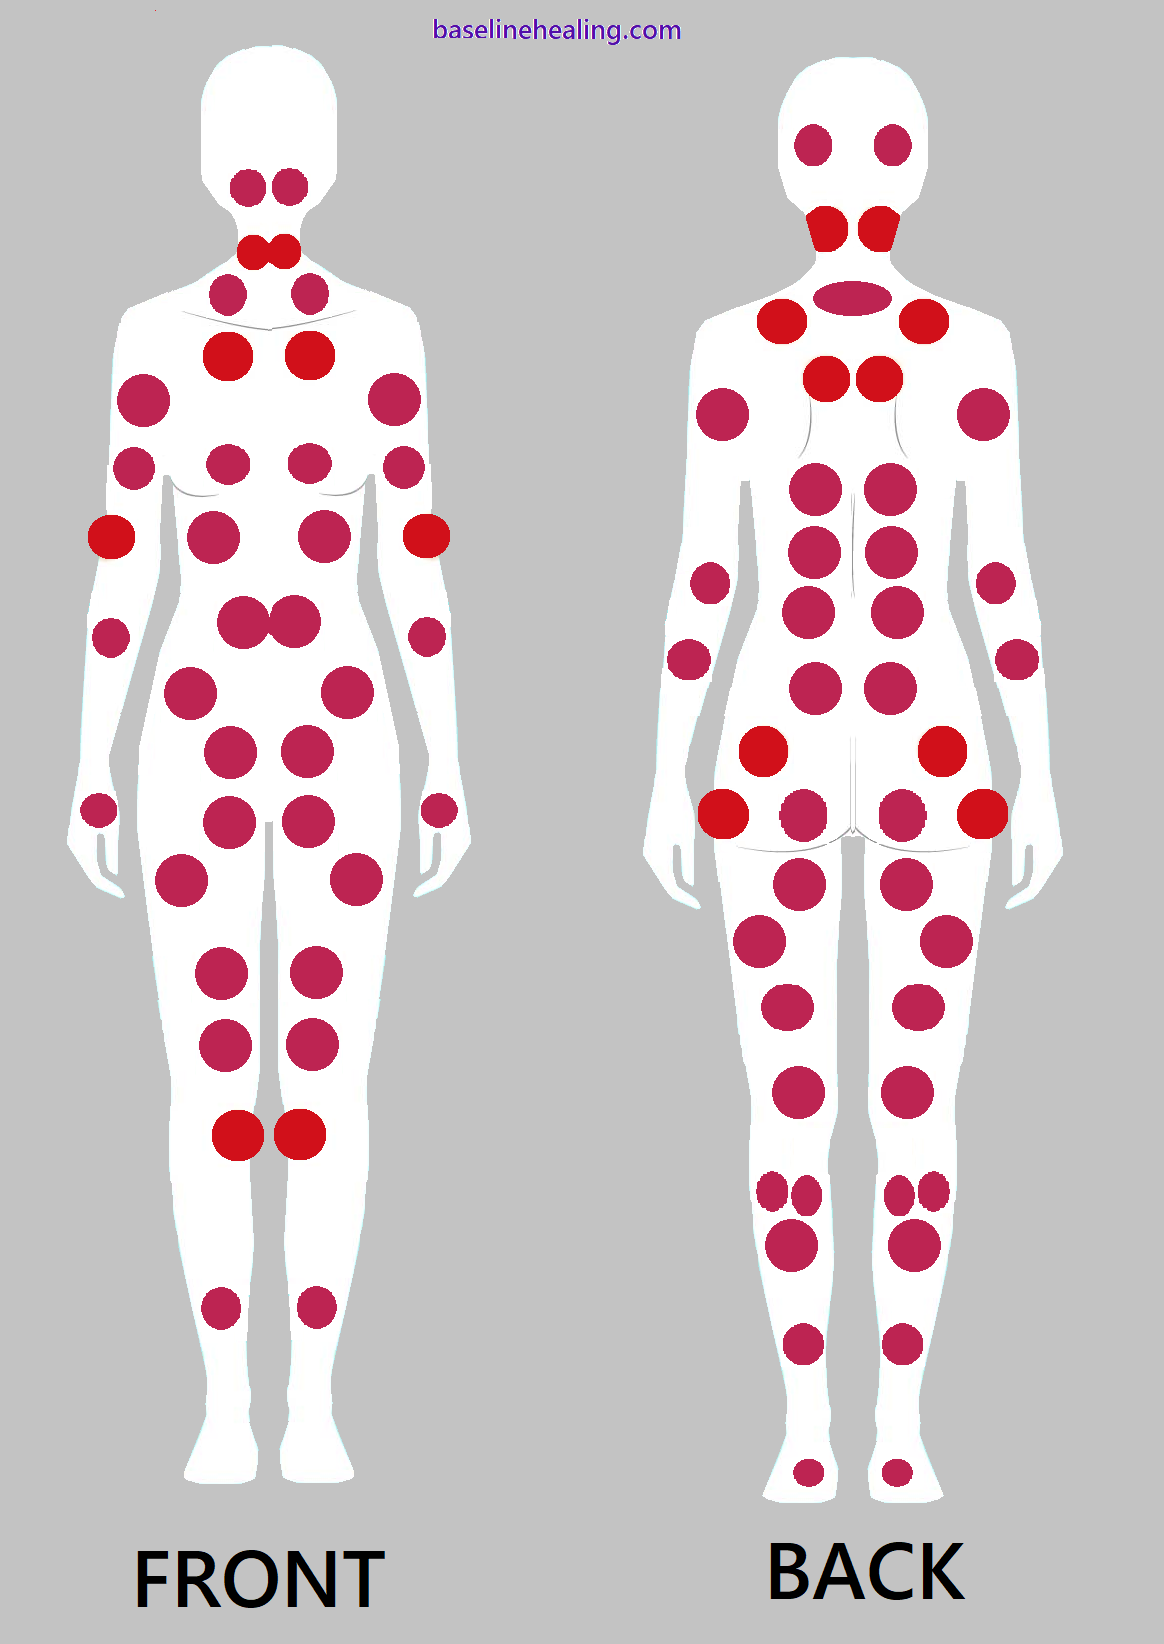 The same two images from above but with more tender points added. Front and back, the body is covered in dots symbolising areas of muscle pain. The myalgia of imbalance causes body-wide stress, cumulative and spreading.